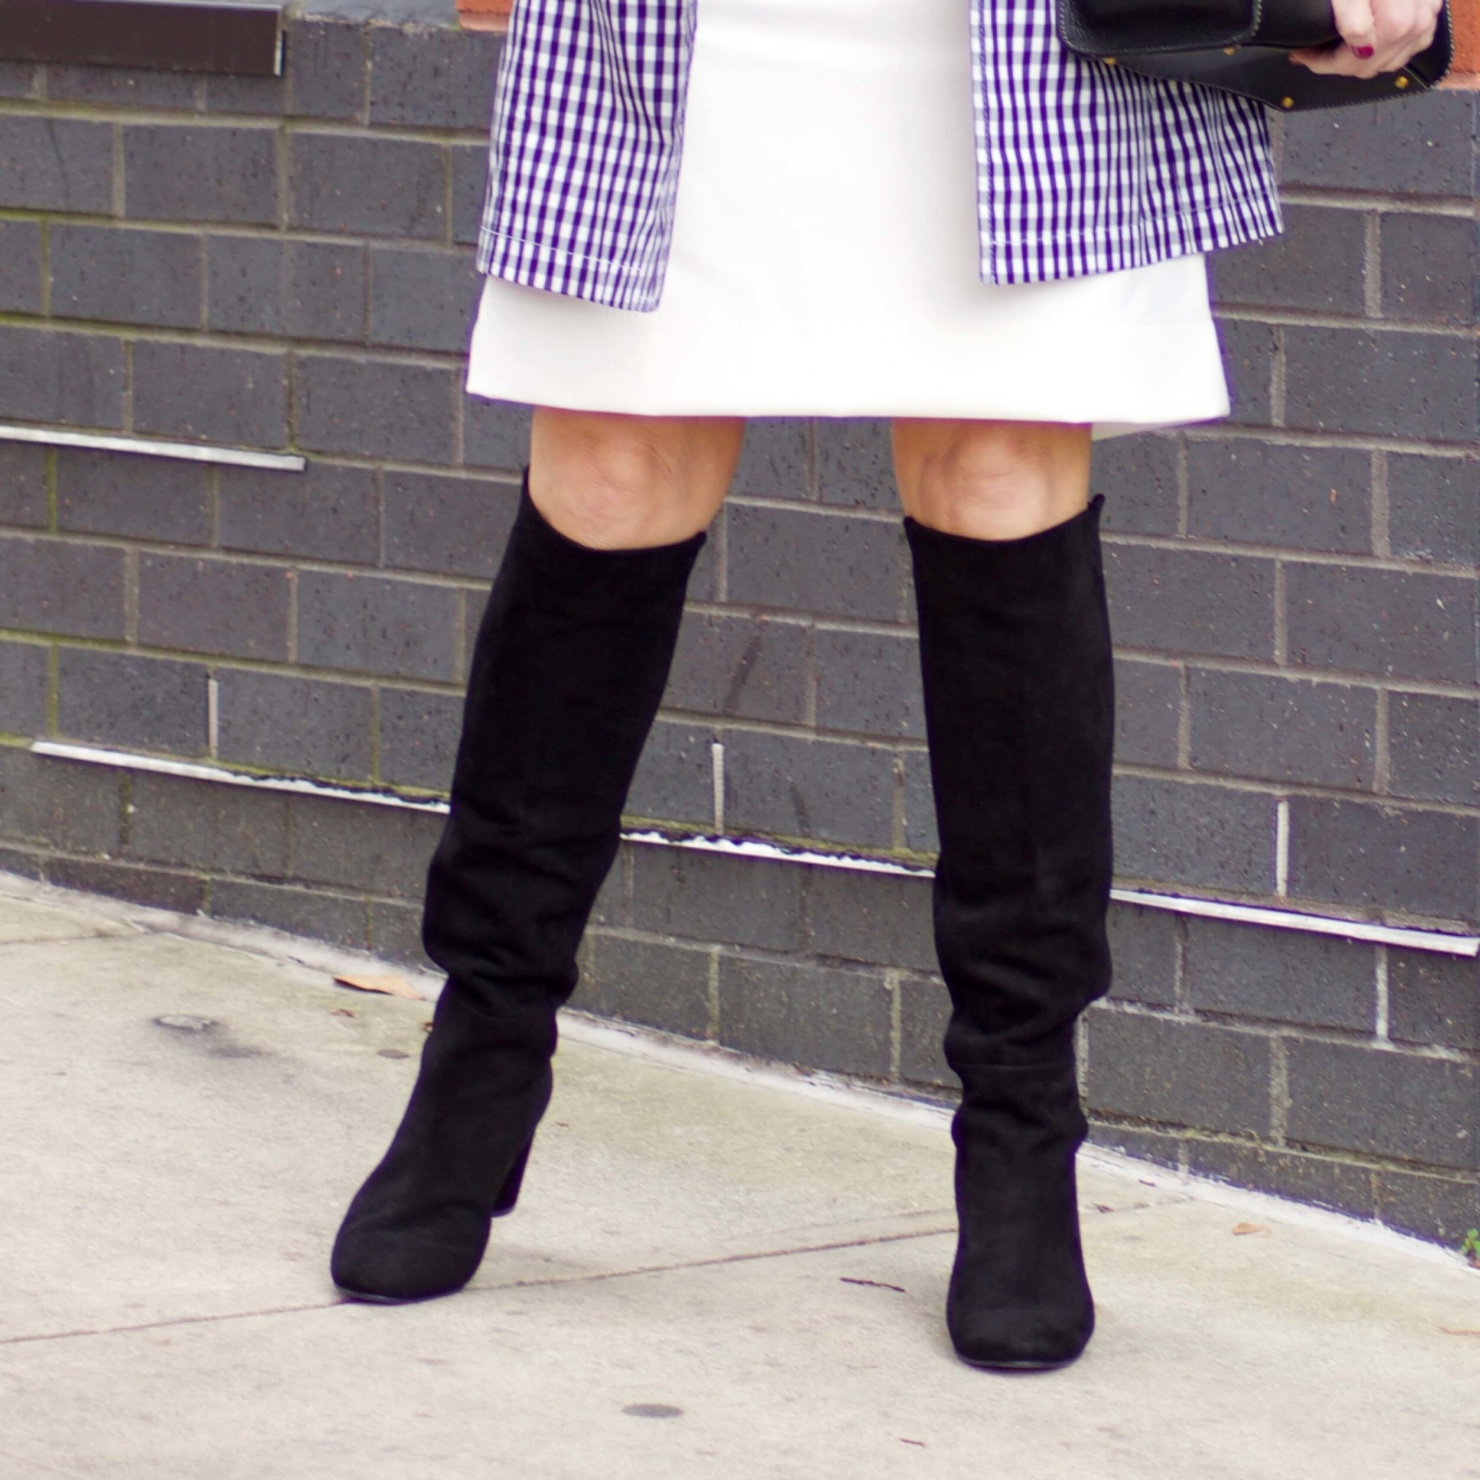 beth from Style at a Certain Age wears a gingham raincoat, white skirt, black sweater, and black boots